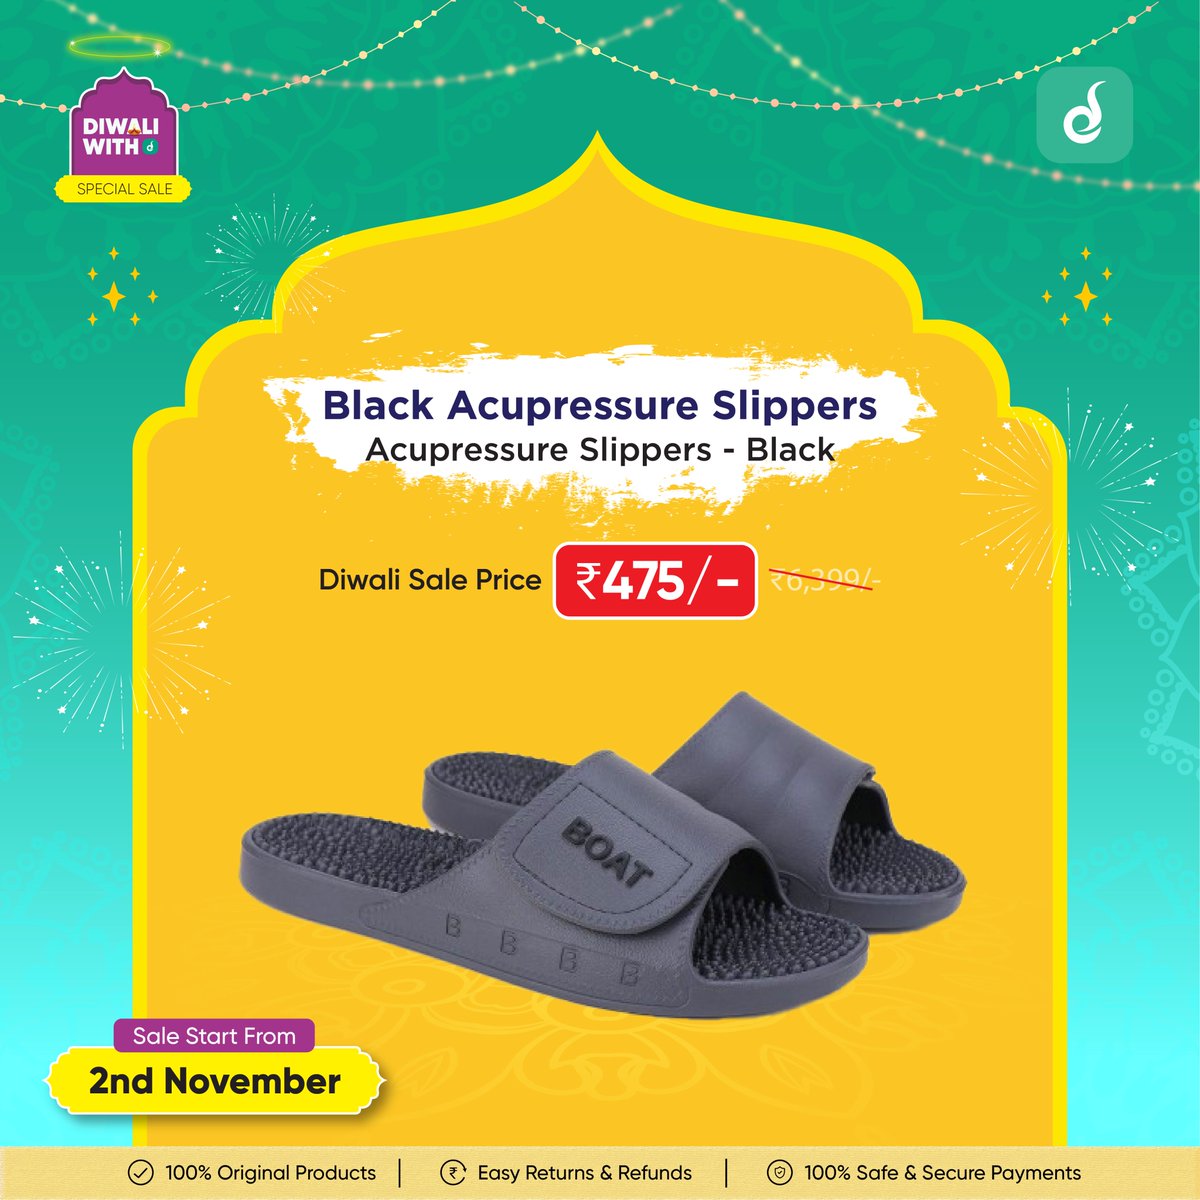 Walk your way to better health with Acupressure Slippers! So what are you waiting for? Order your pair Today.  #acupressureslippers #healthbenefits #comfortshoes #Ecommerce
#Dikazo #onlineshopping 
visit- dikazo.com/product/acupre…